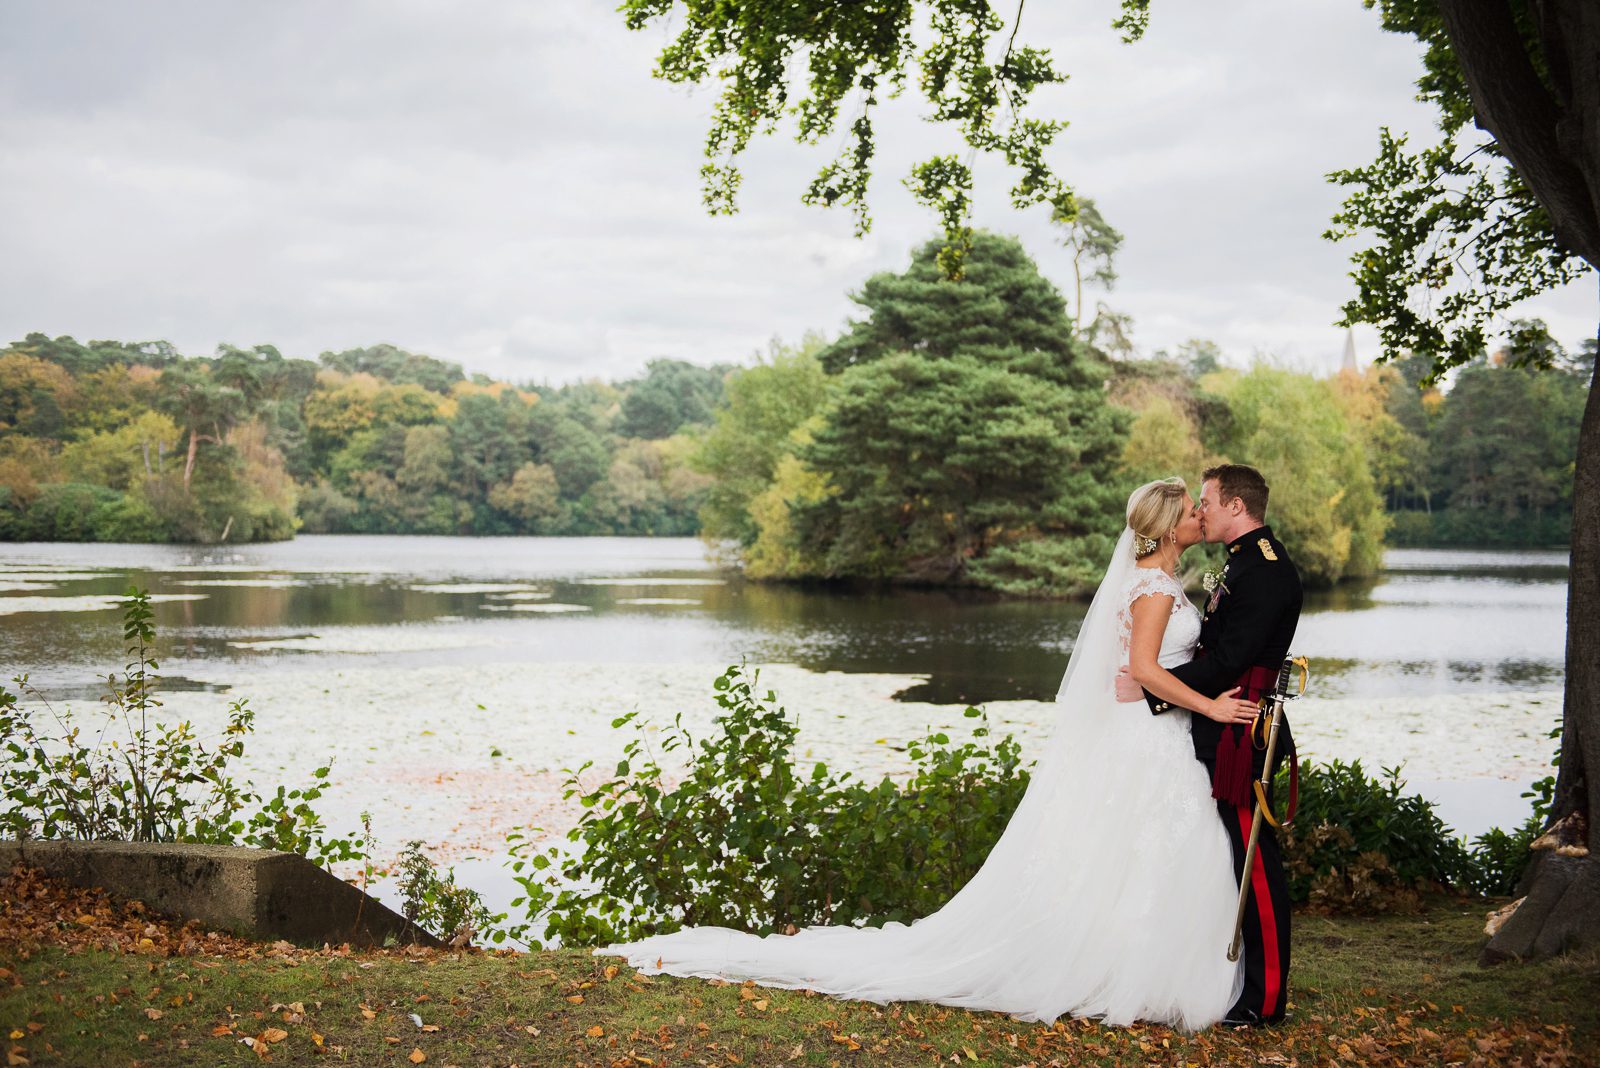 Bride and groom portraits by the lake in the grounds of the Royal Military Academy Sandhurst for their September wedding.